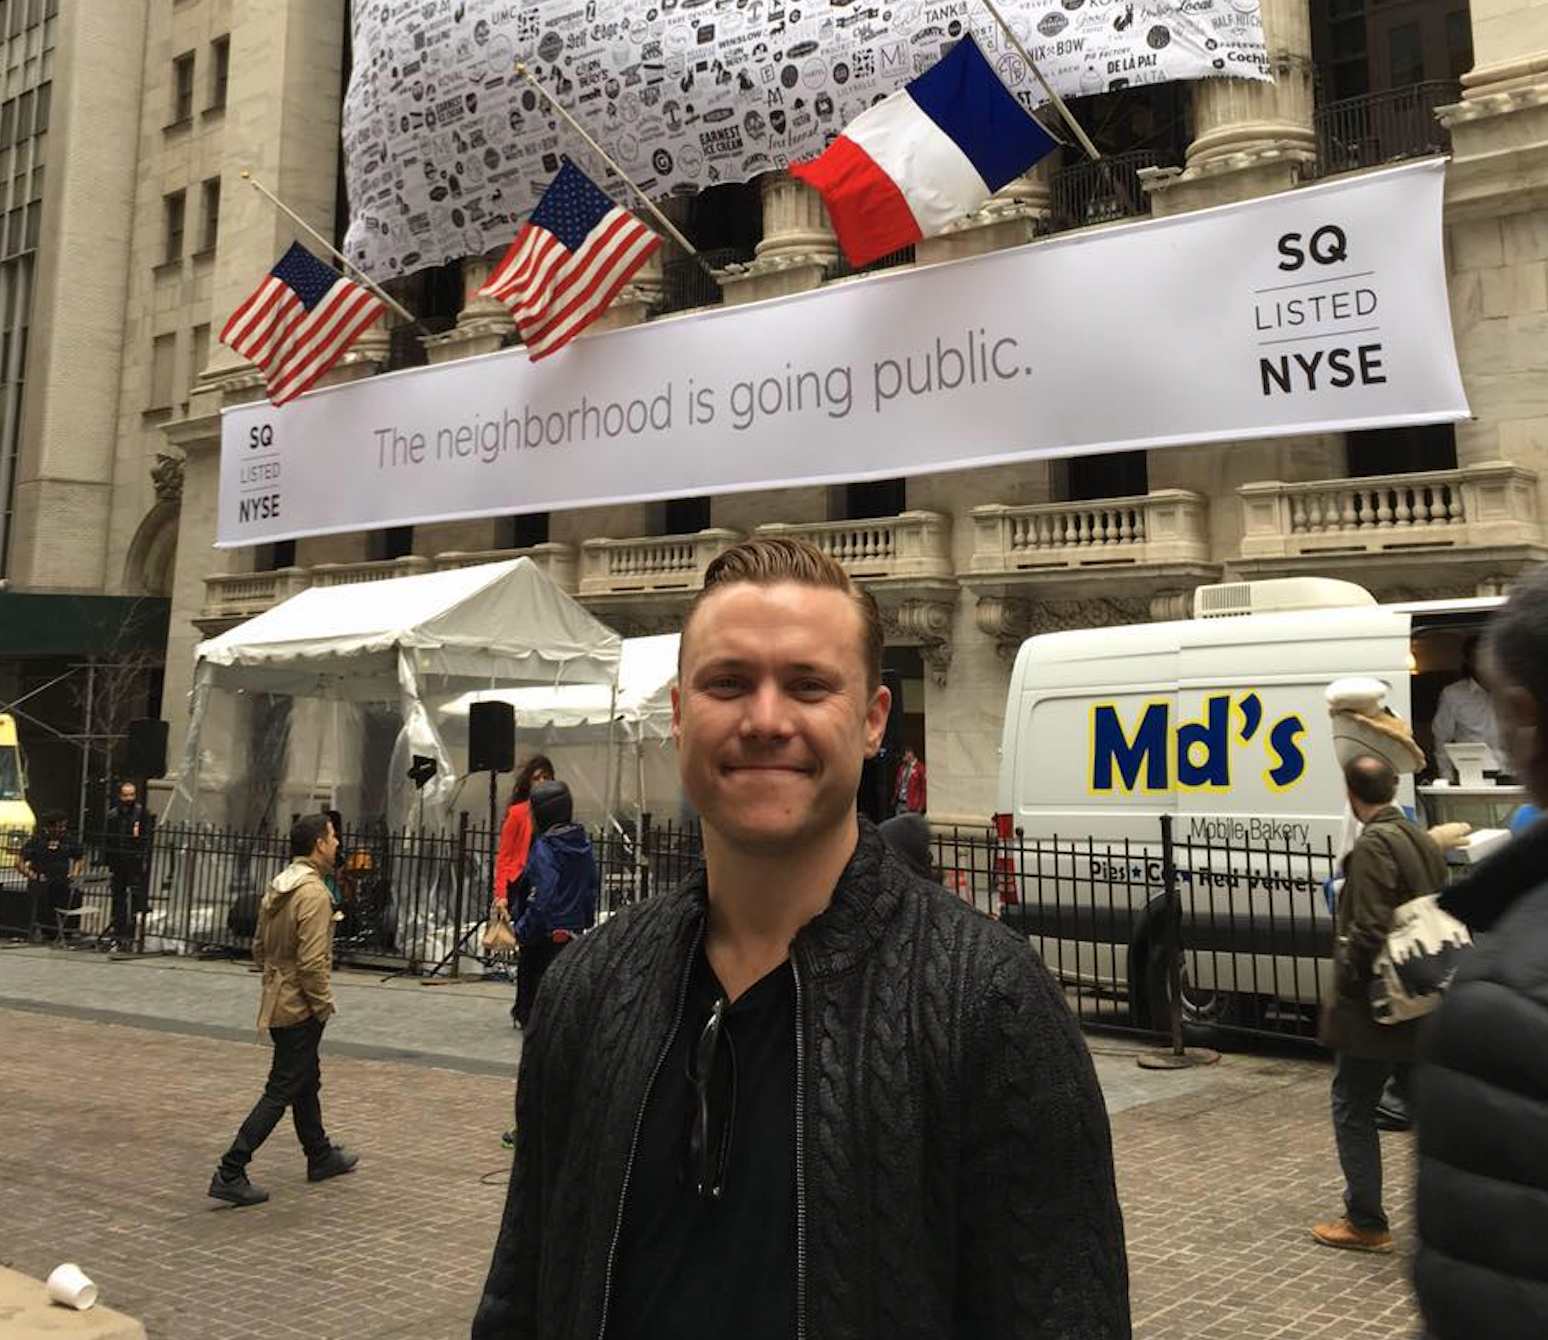 Bob Lee pictured at the New York Stock Exchange in 2015 on the day that Square, now known as Block, was listed as a public company